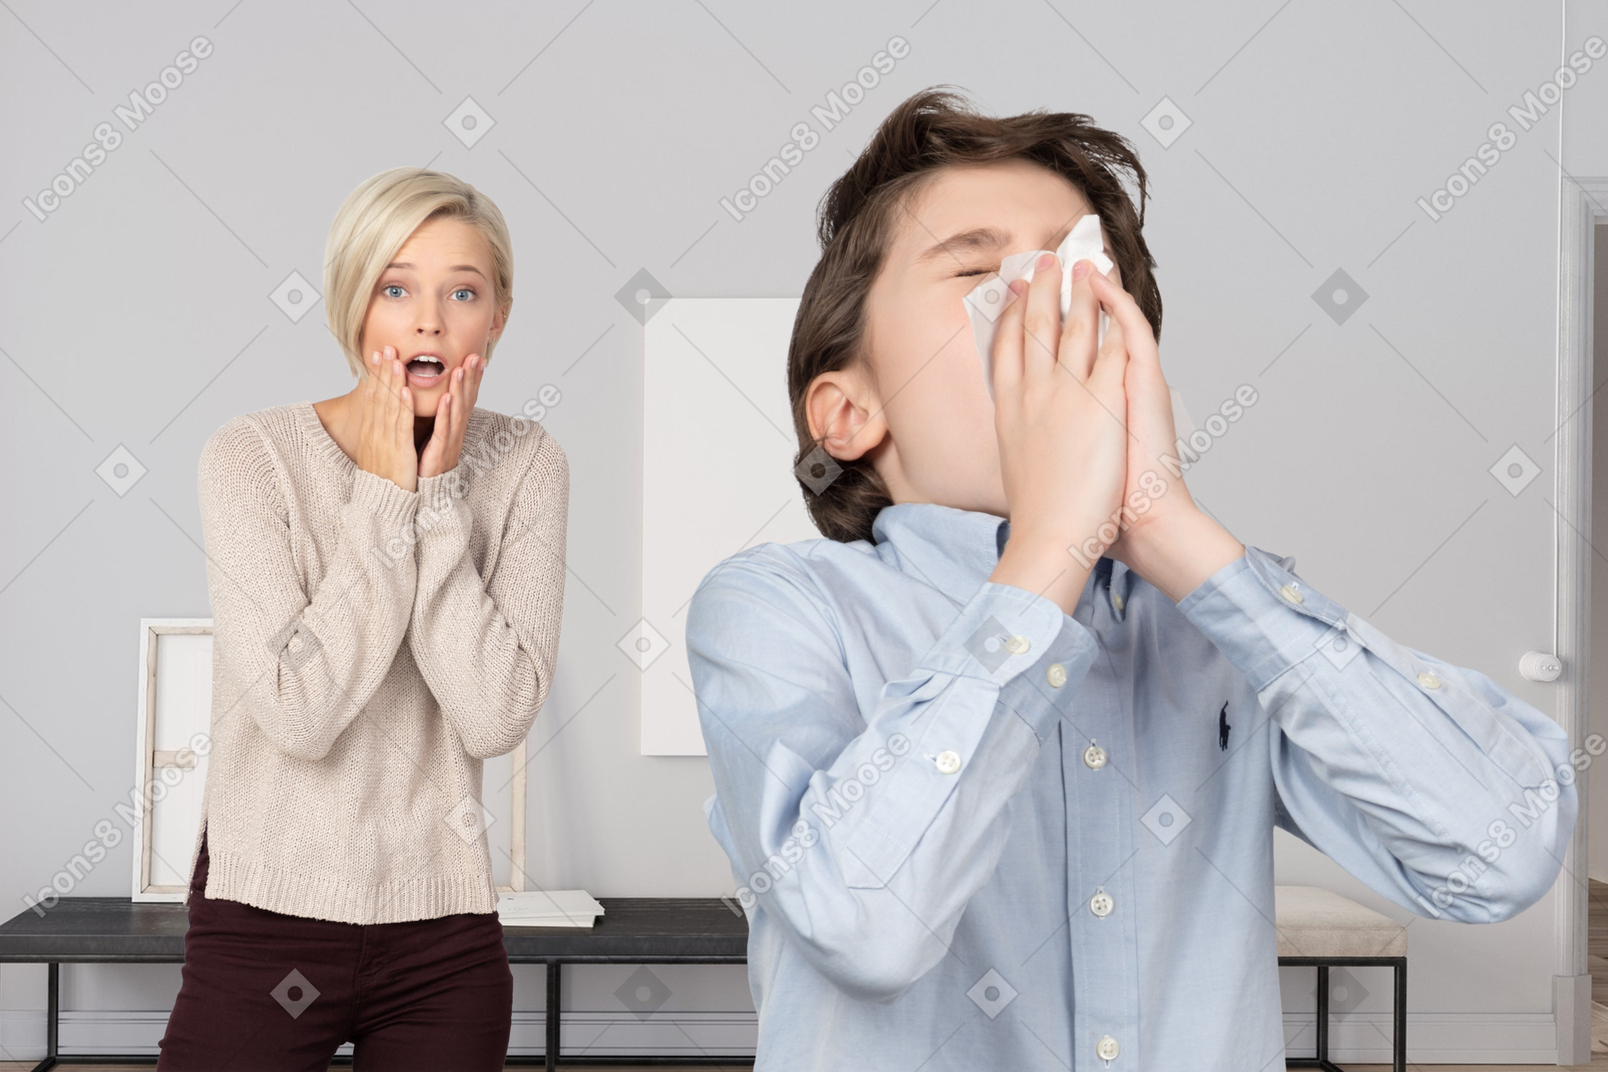 Worried woman looking at a sneezing boy